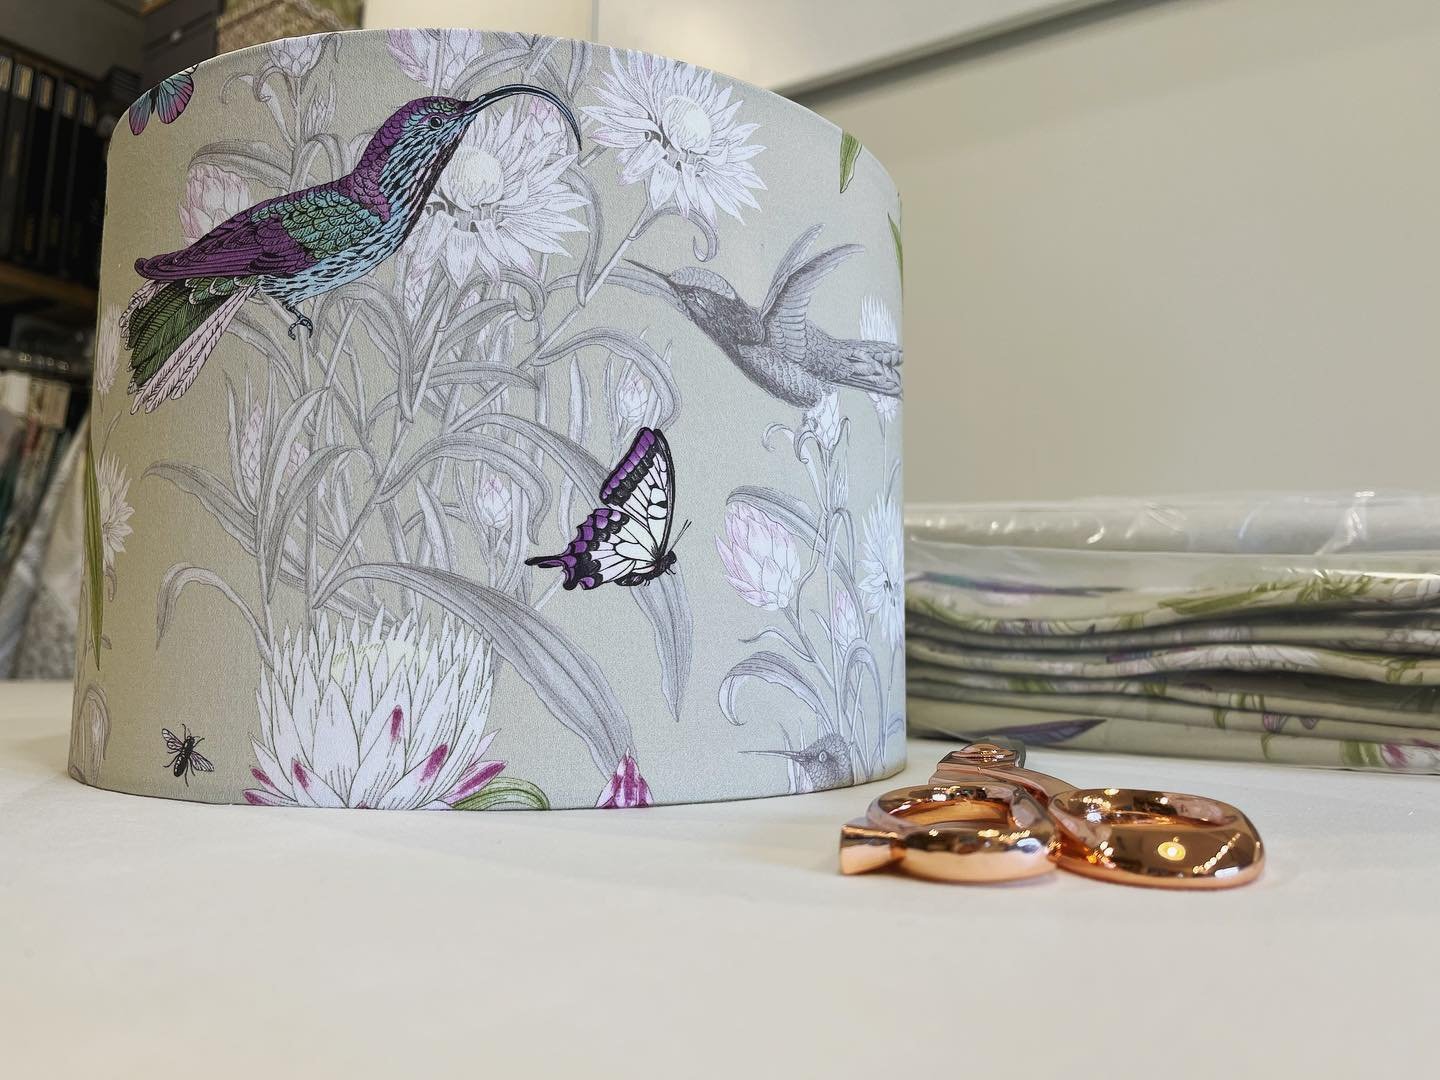 Hints of summer found in the completion of new work which doesn&rsquo;t love butterflies @blendworthinteriors @martindannell #lampshade #lovenorthdevon #interiordesign #ecostudio #homeoffice #newlocation‼️‼️‼️